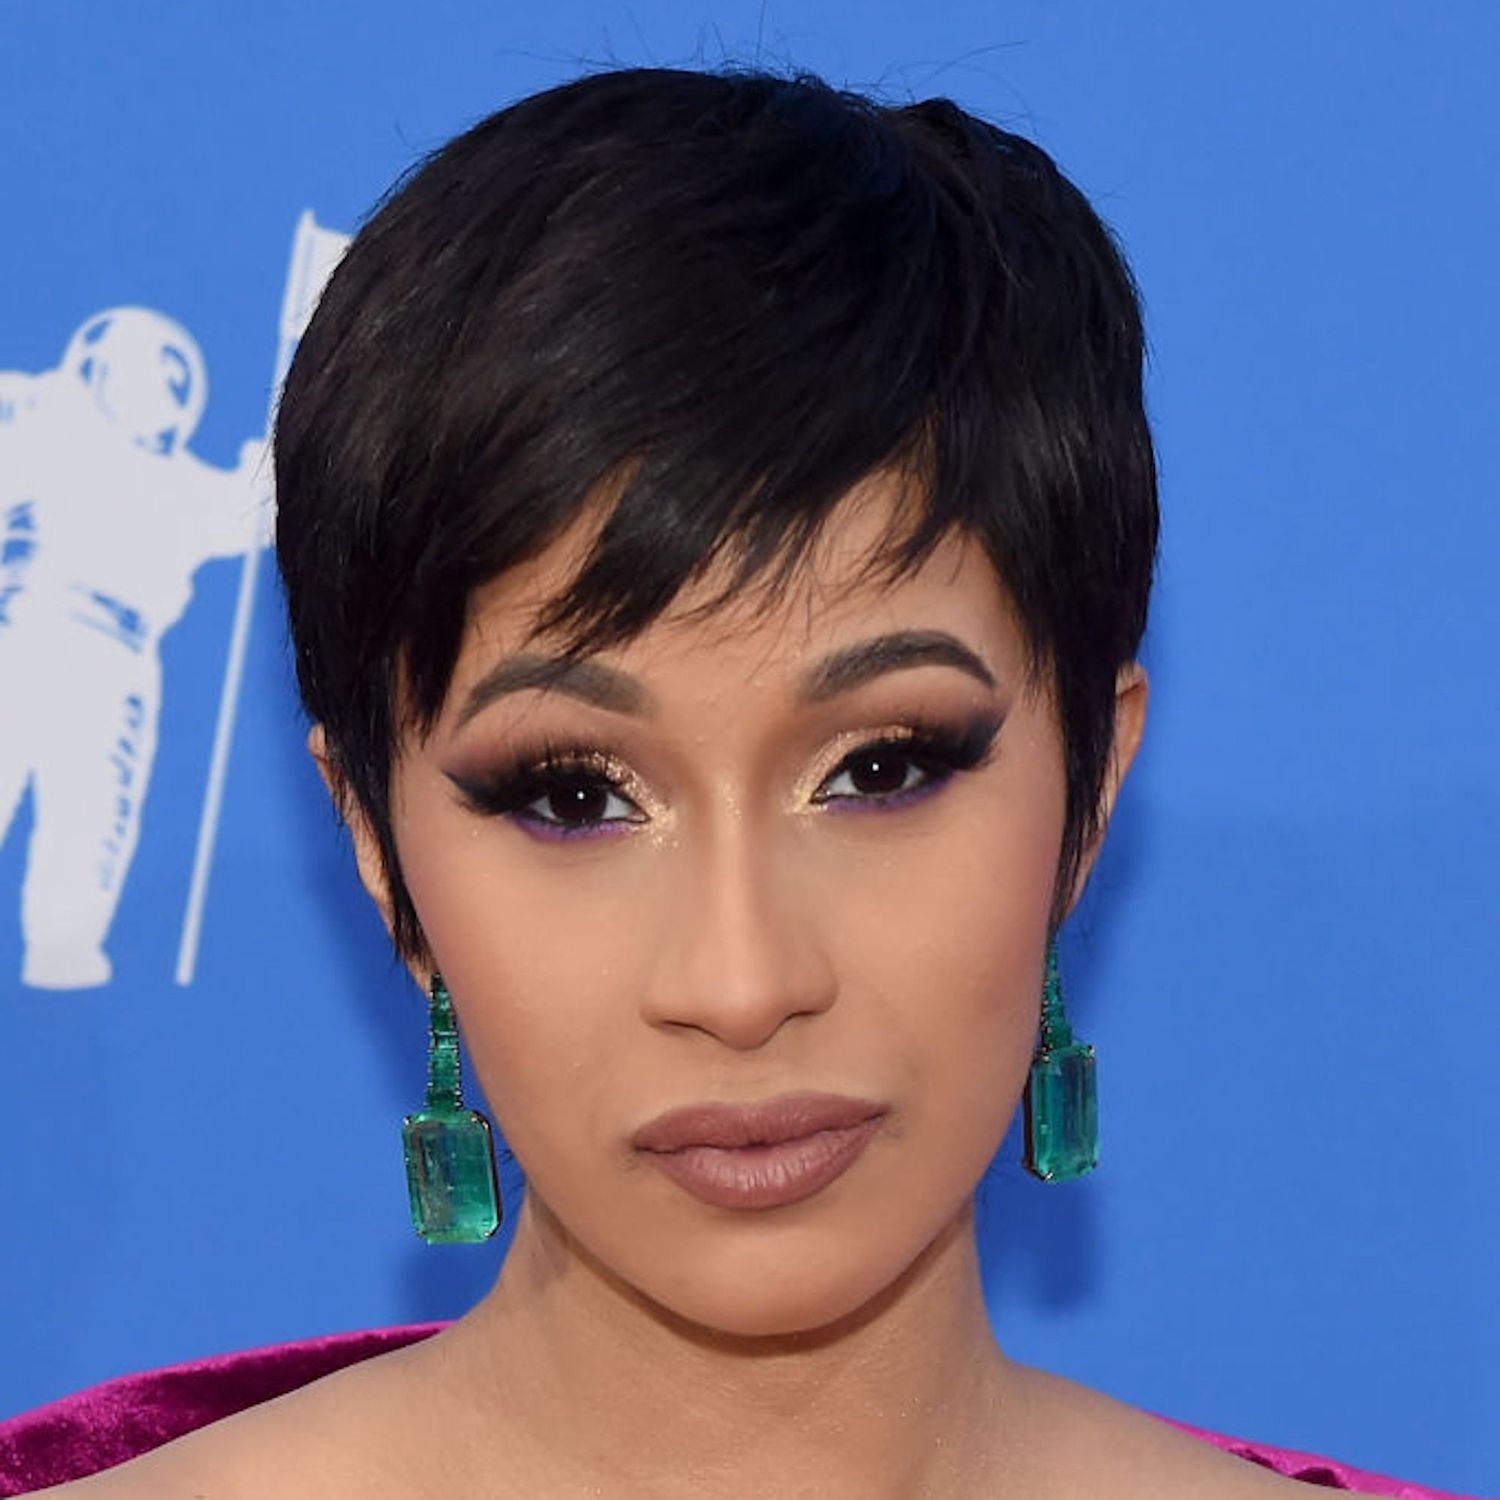 Cardi B with a cropped pixie-cut hairstyle